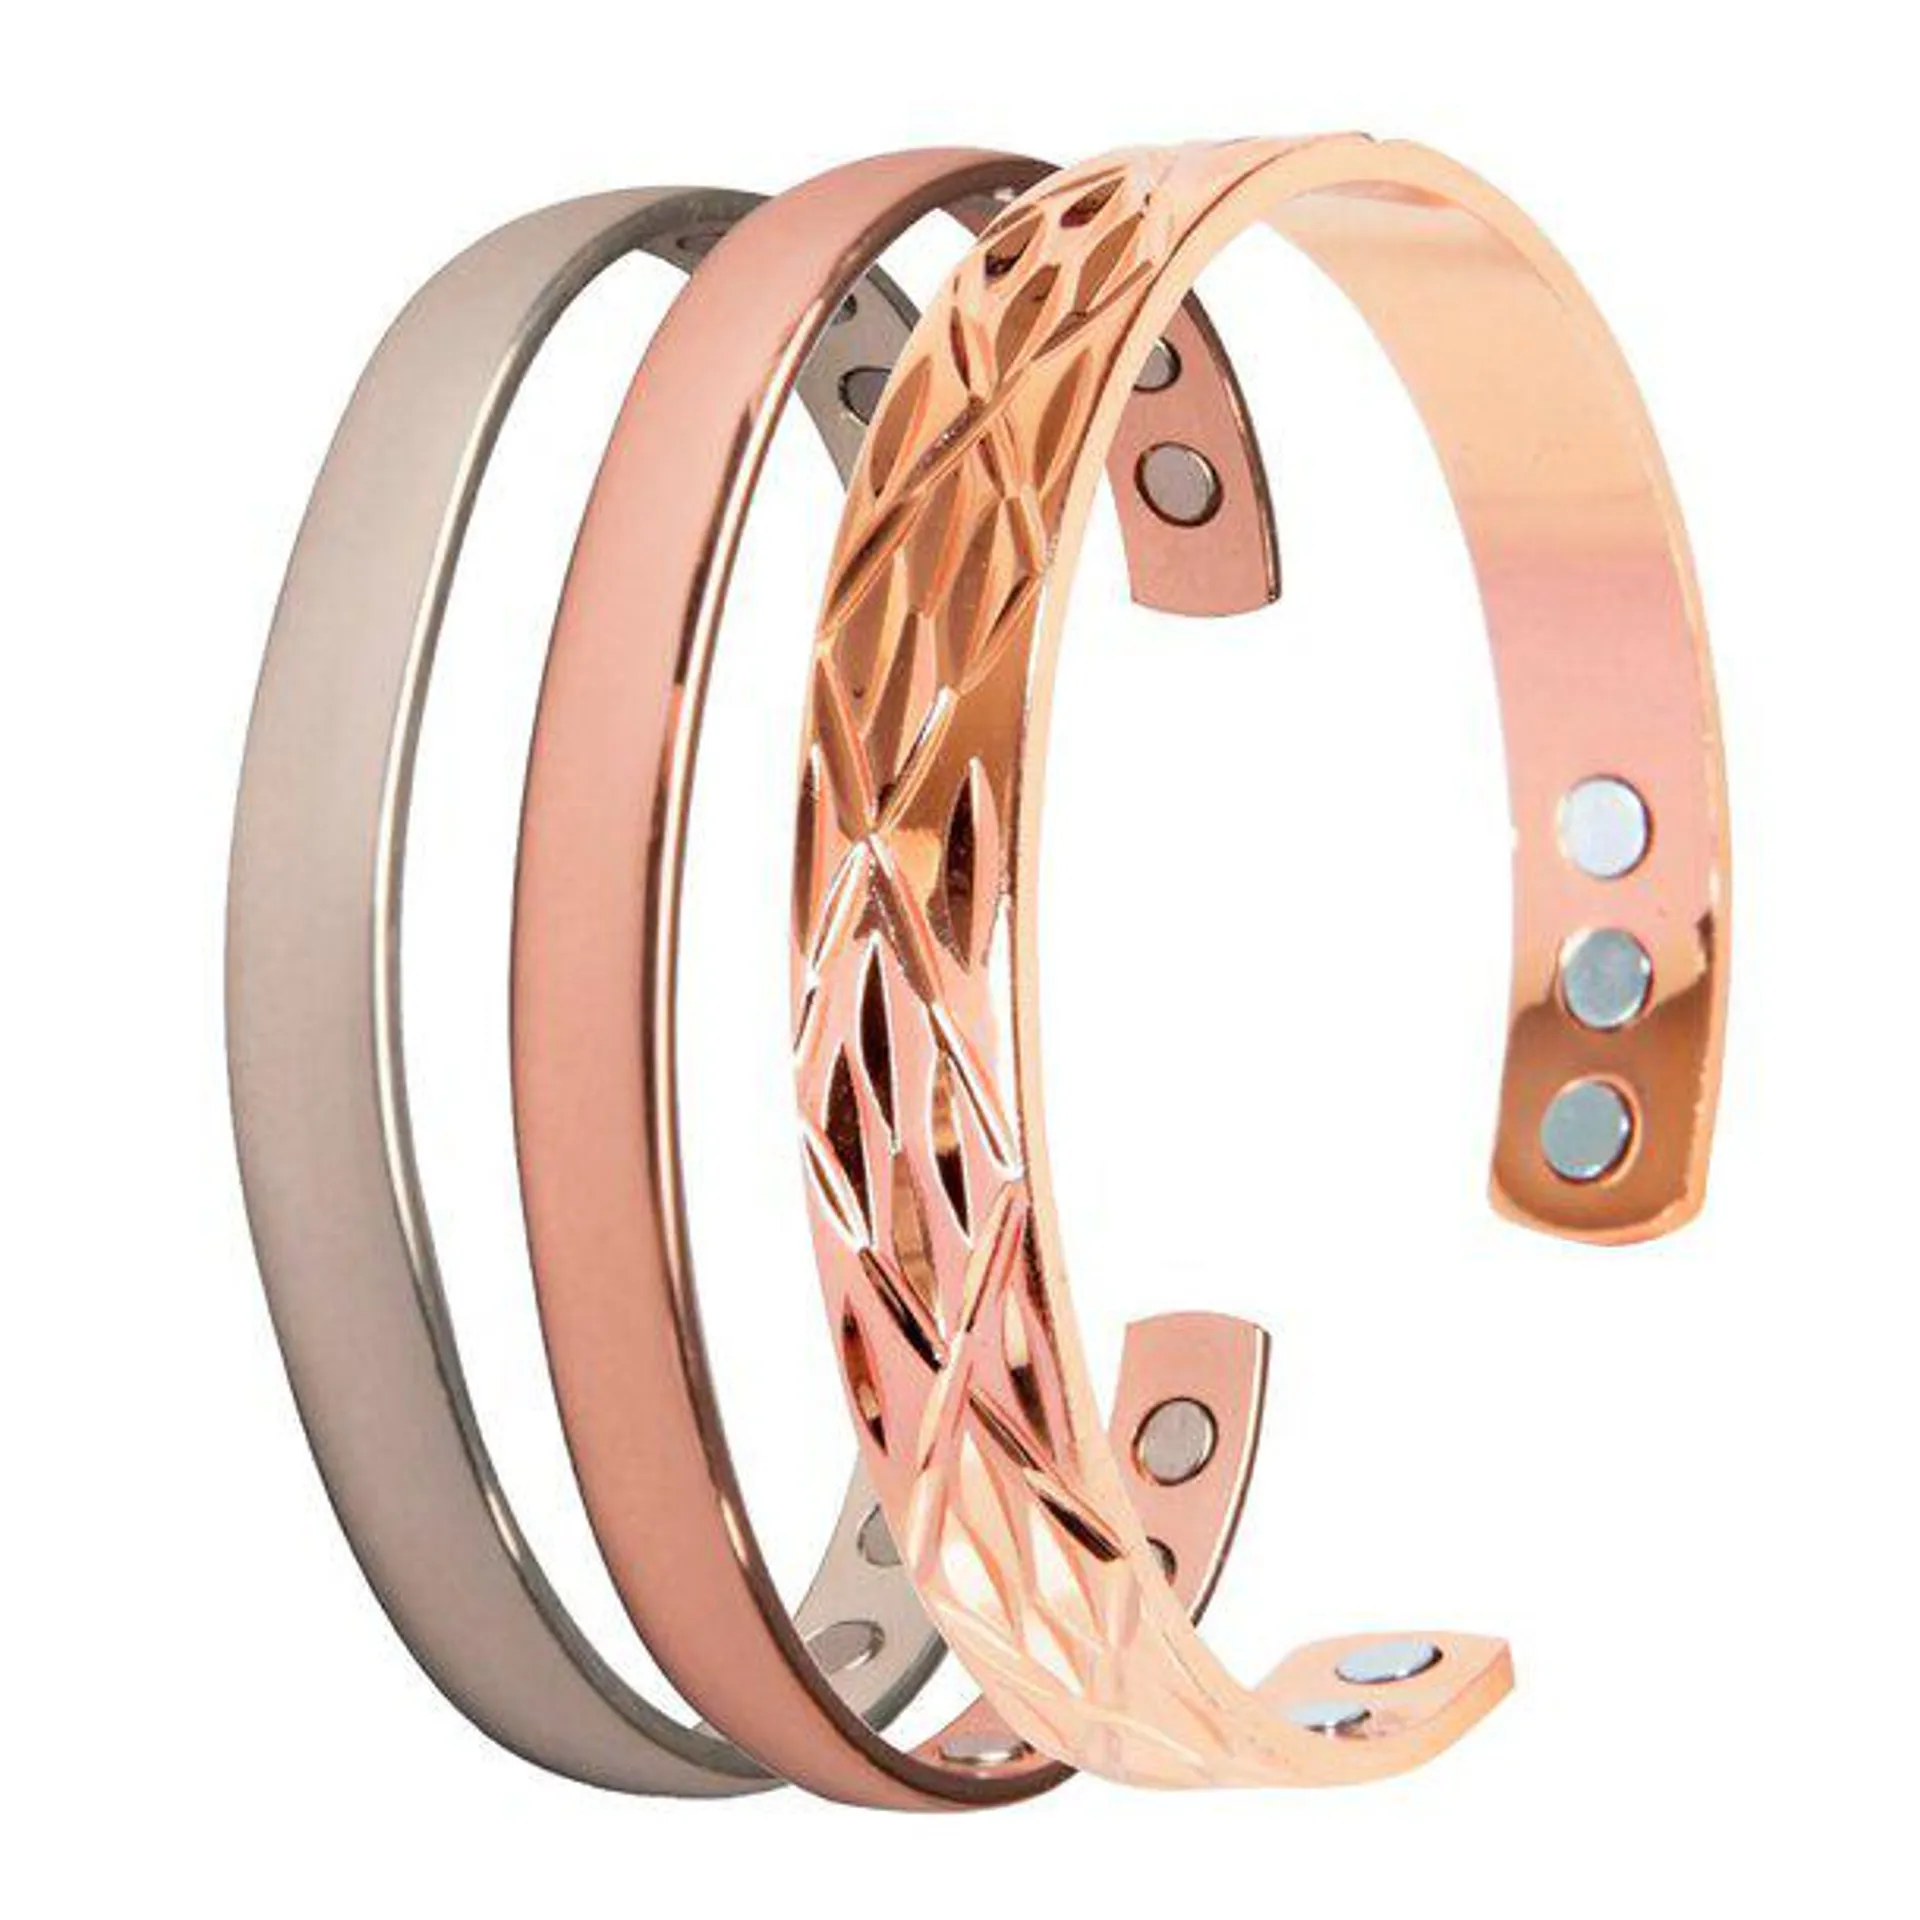 Copper and Magnet Bangle